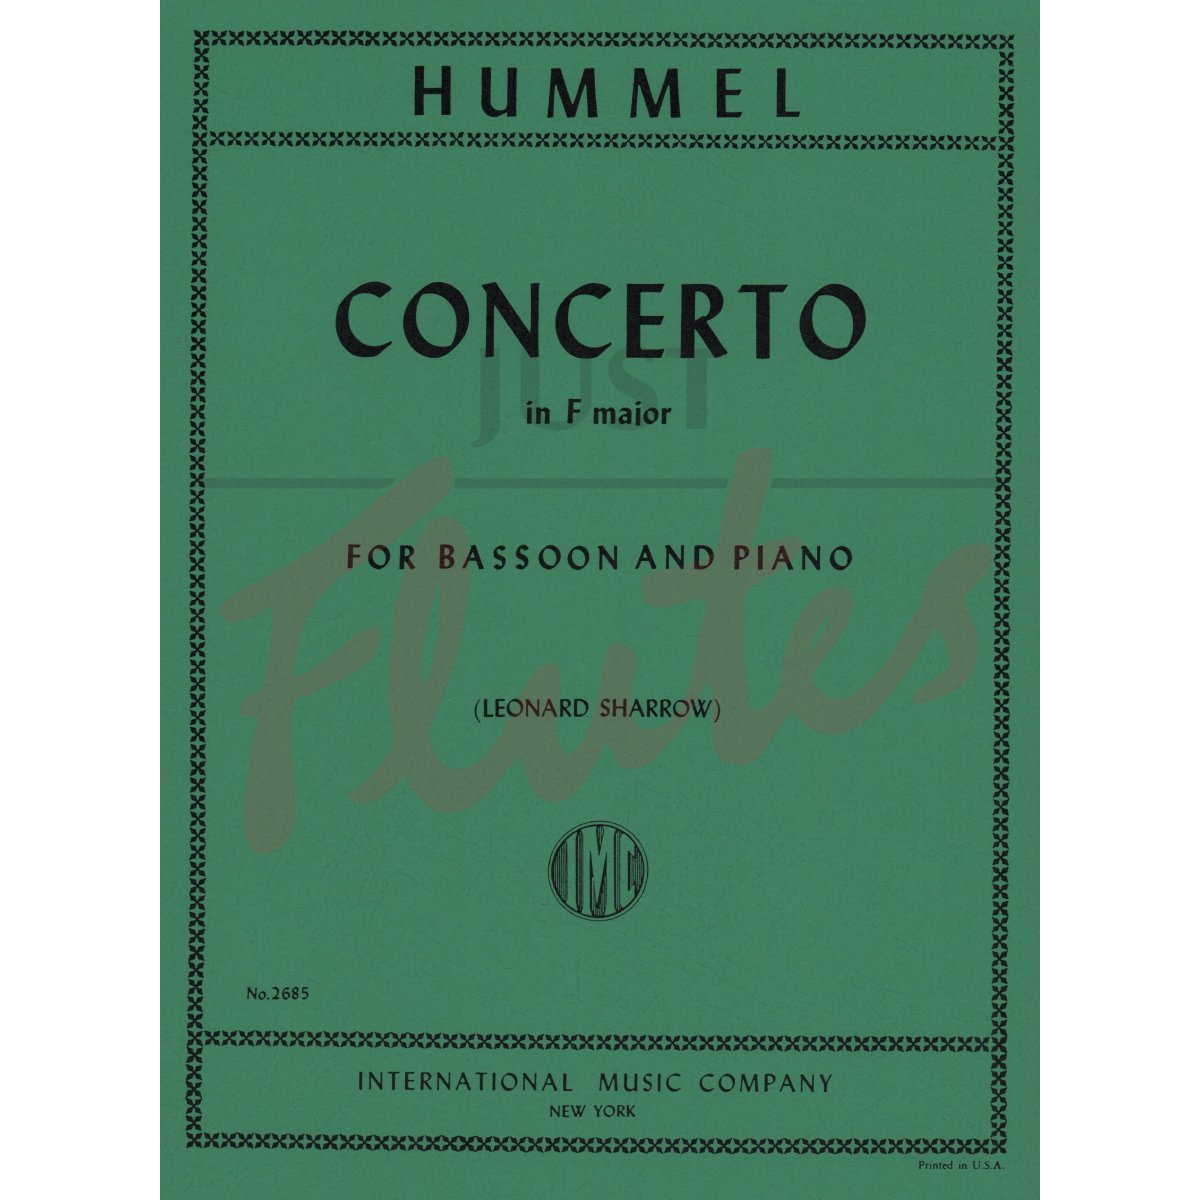 Concerto in F major for Bassoon and Piano